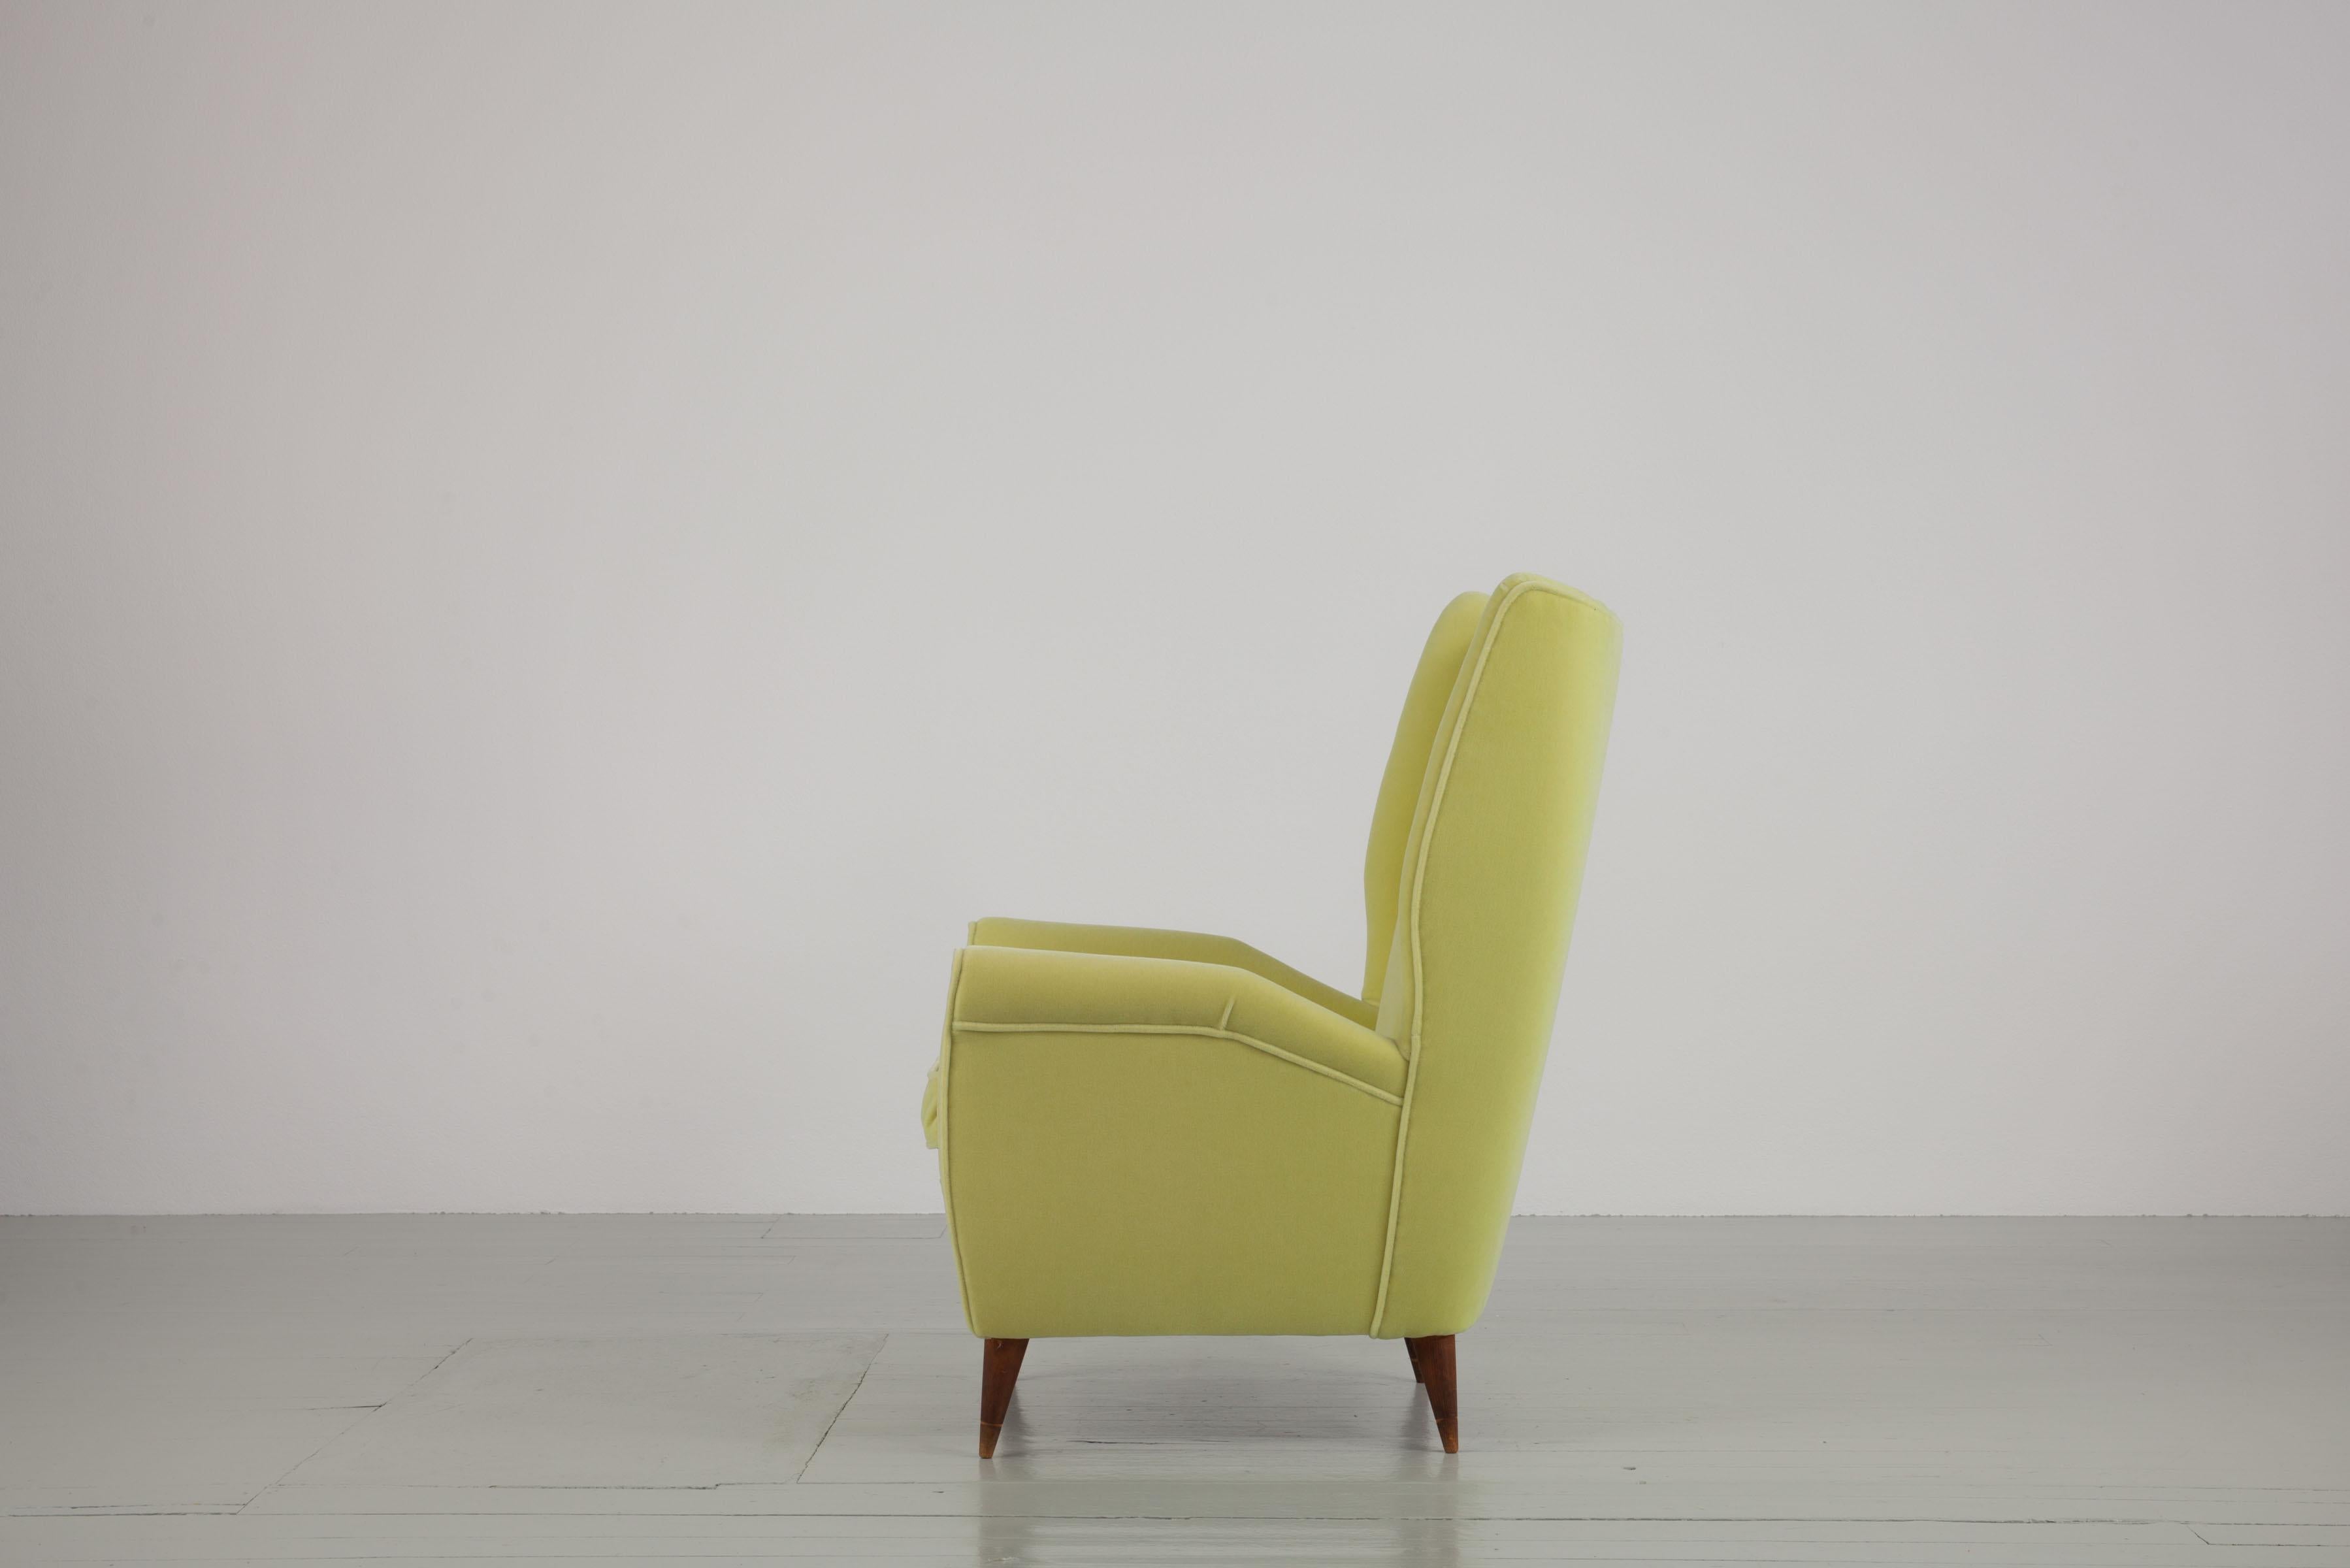 Italian Yellow Wingback Chair, Produced by I.S.A. Bergamo, 1950s For Sale 2